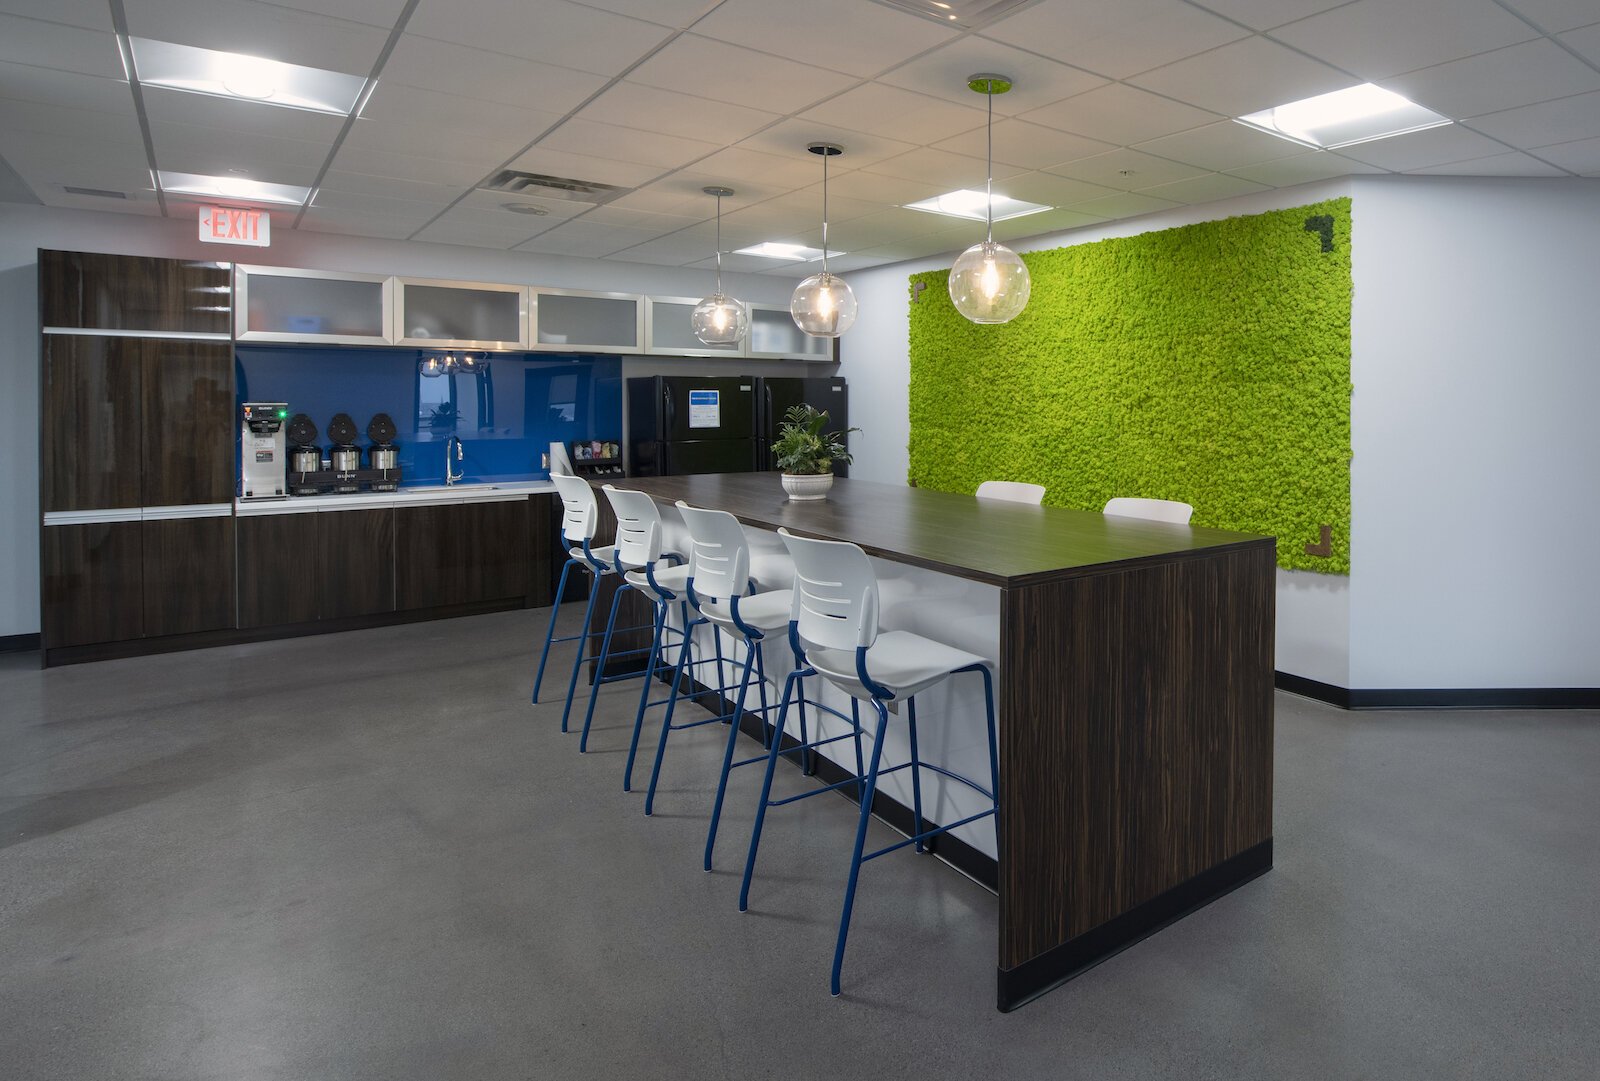 In its work with the Northeast Indiana Regional Partnership, Design Collaborative incorporated a “green wall” in the community breakroom to give employees a spark of color.